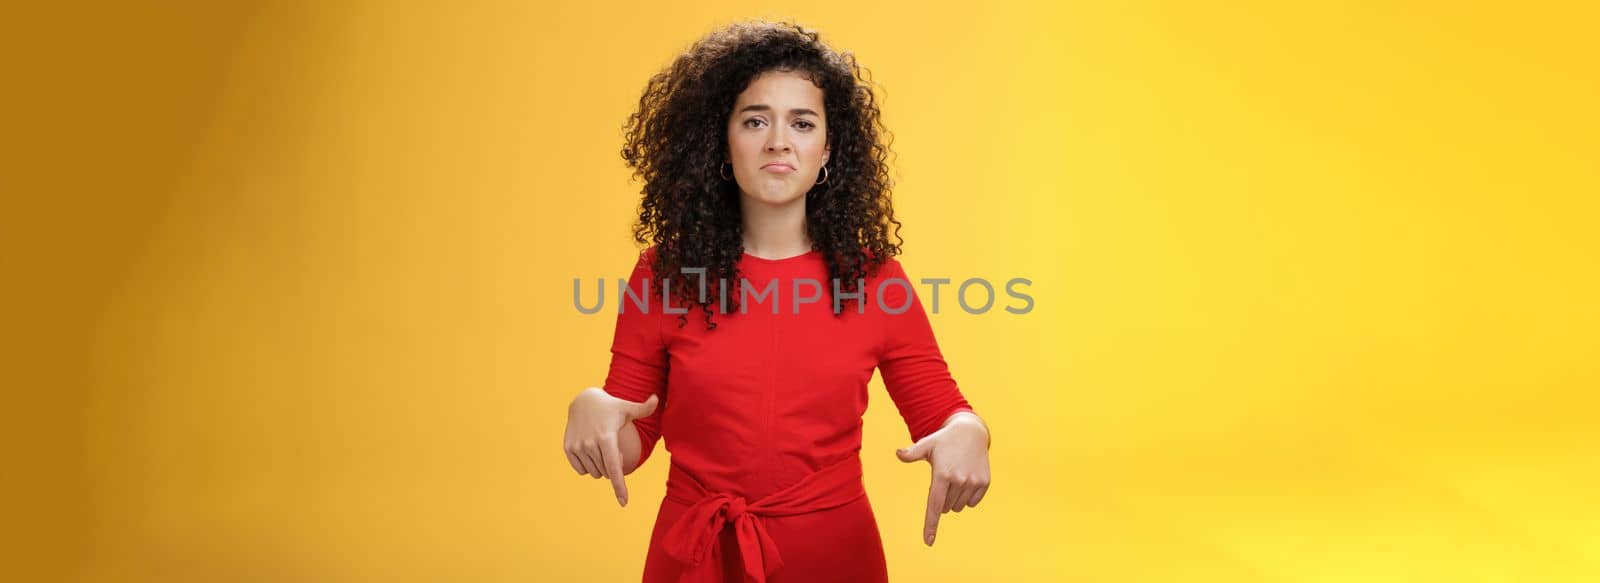 Portrait of gloomy girl with sad face pursing lips down frowning disappointed and pointing down with regret and unsatisfied expression, missing opportunity feeling upset over yellow background by Benzoix